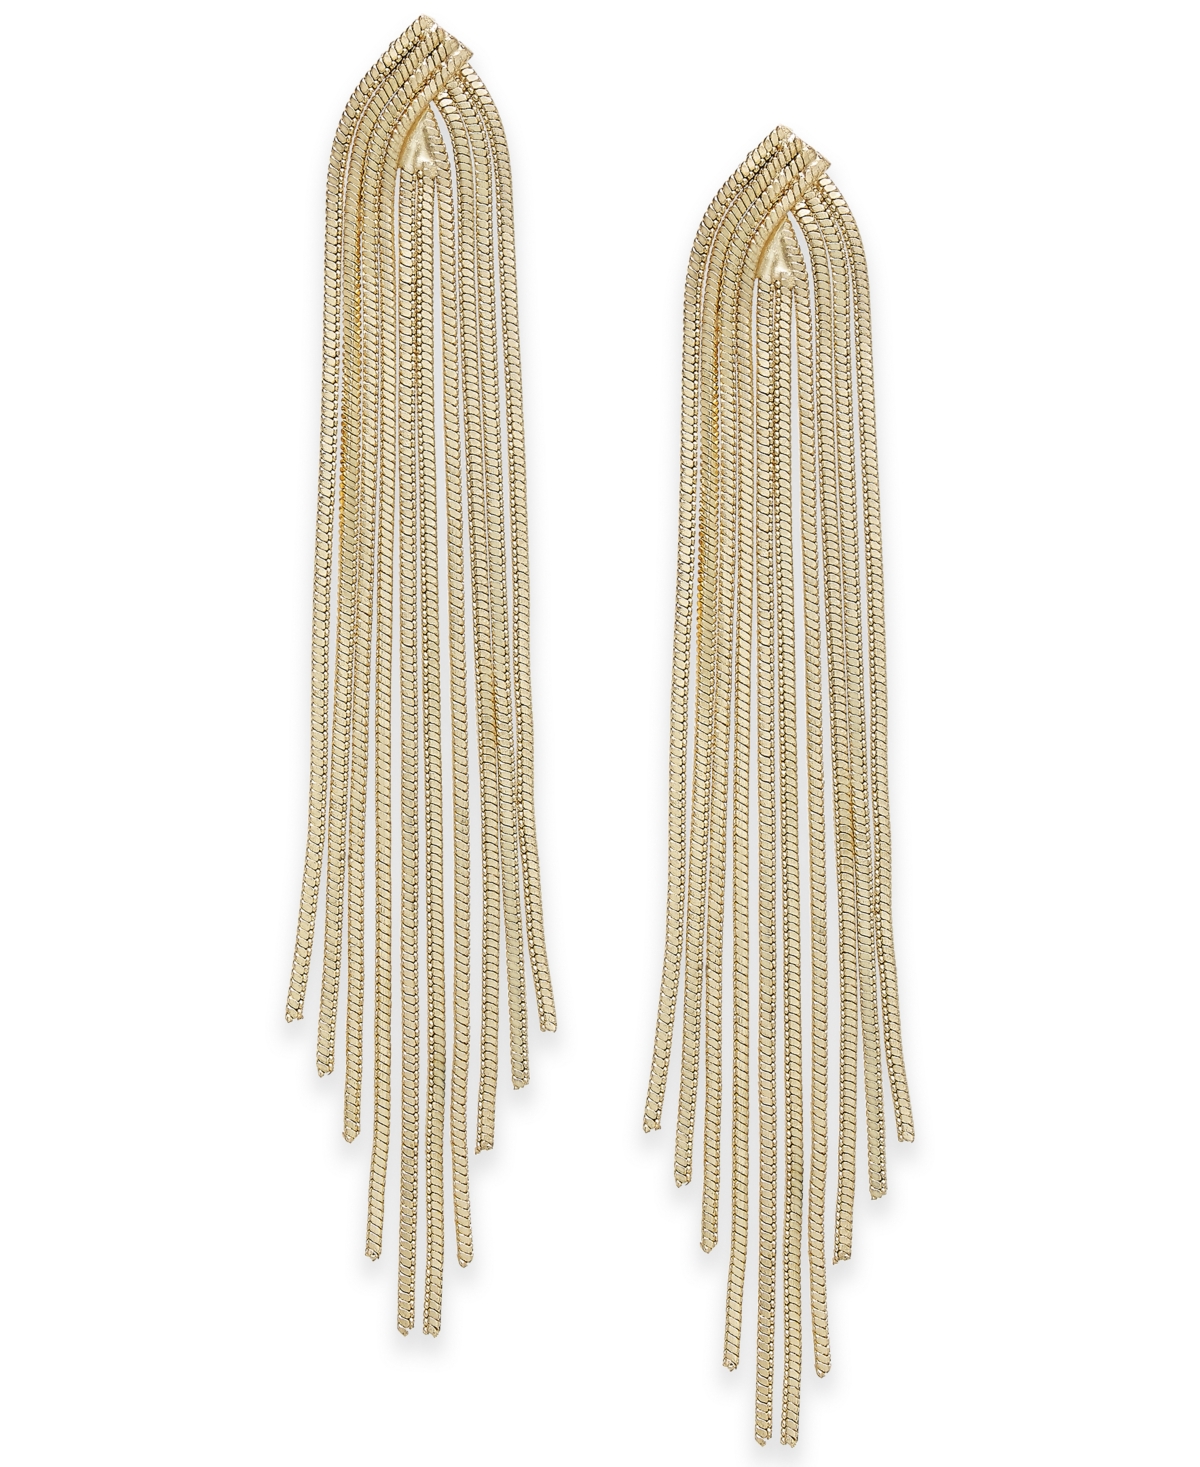 Gold-Tone Snake Chain Multi-Row Statement Earrings, Created for Macy's - Gold